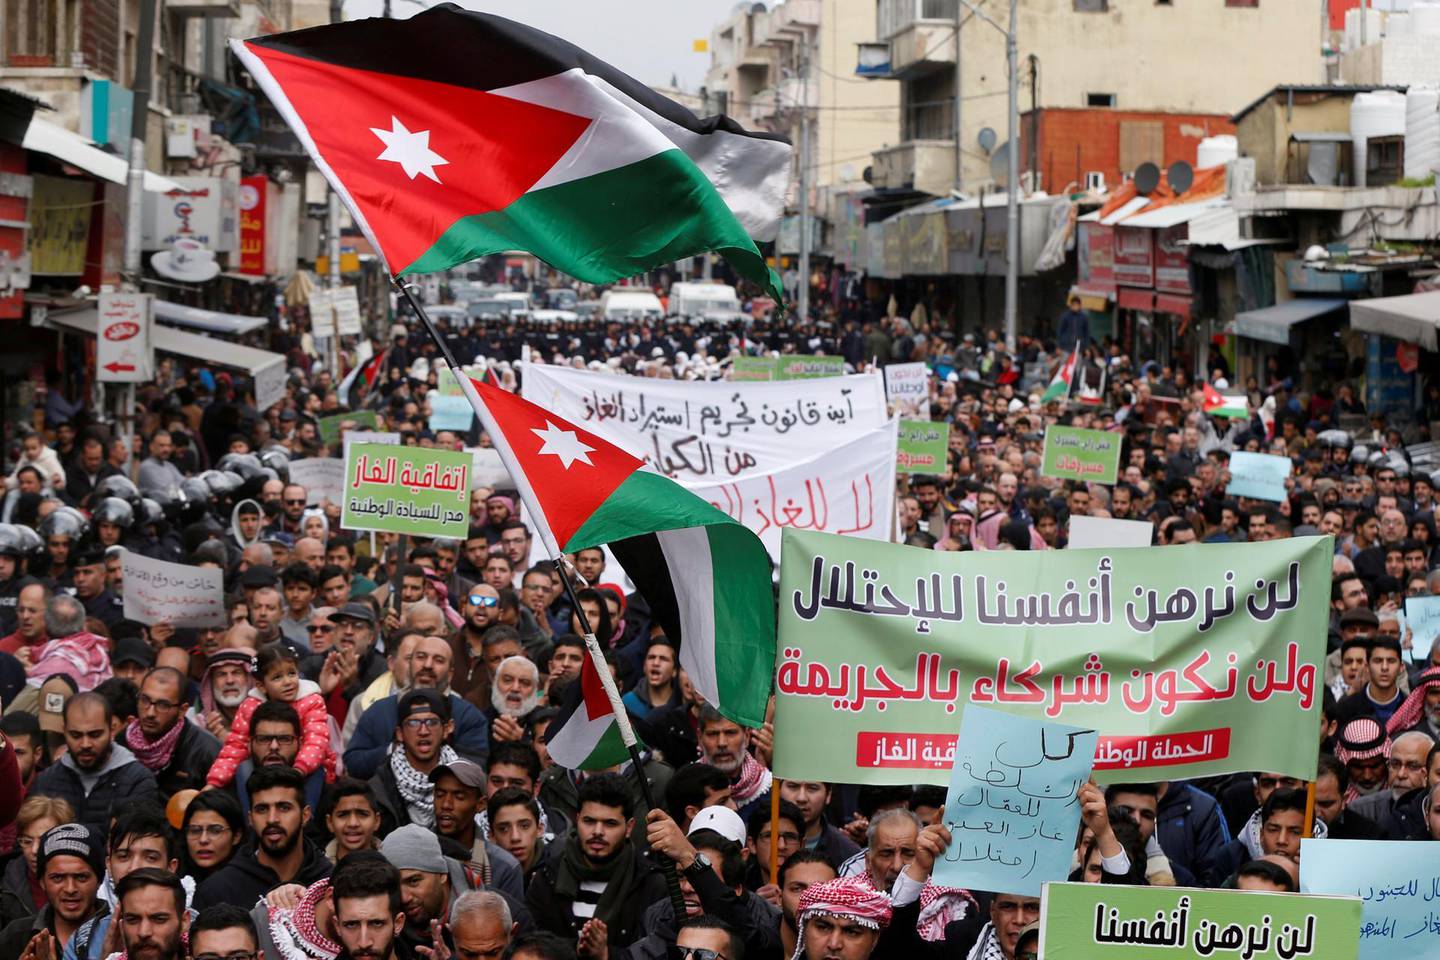 FILE PHOTO: Demonstrators hold Jordanian national flags and chant slogans during a protest against a government's agreement to import natural gas from Israel, in Amman, Jordan January 17, 2020. The placard reads: "We will not mortgage ourselves to the occupation, and we will not be complicit in the crime". REUTERS/Muhammad Hamed/File Photo